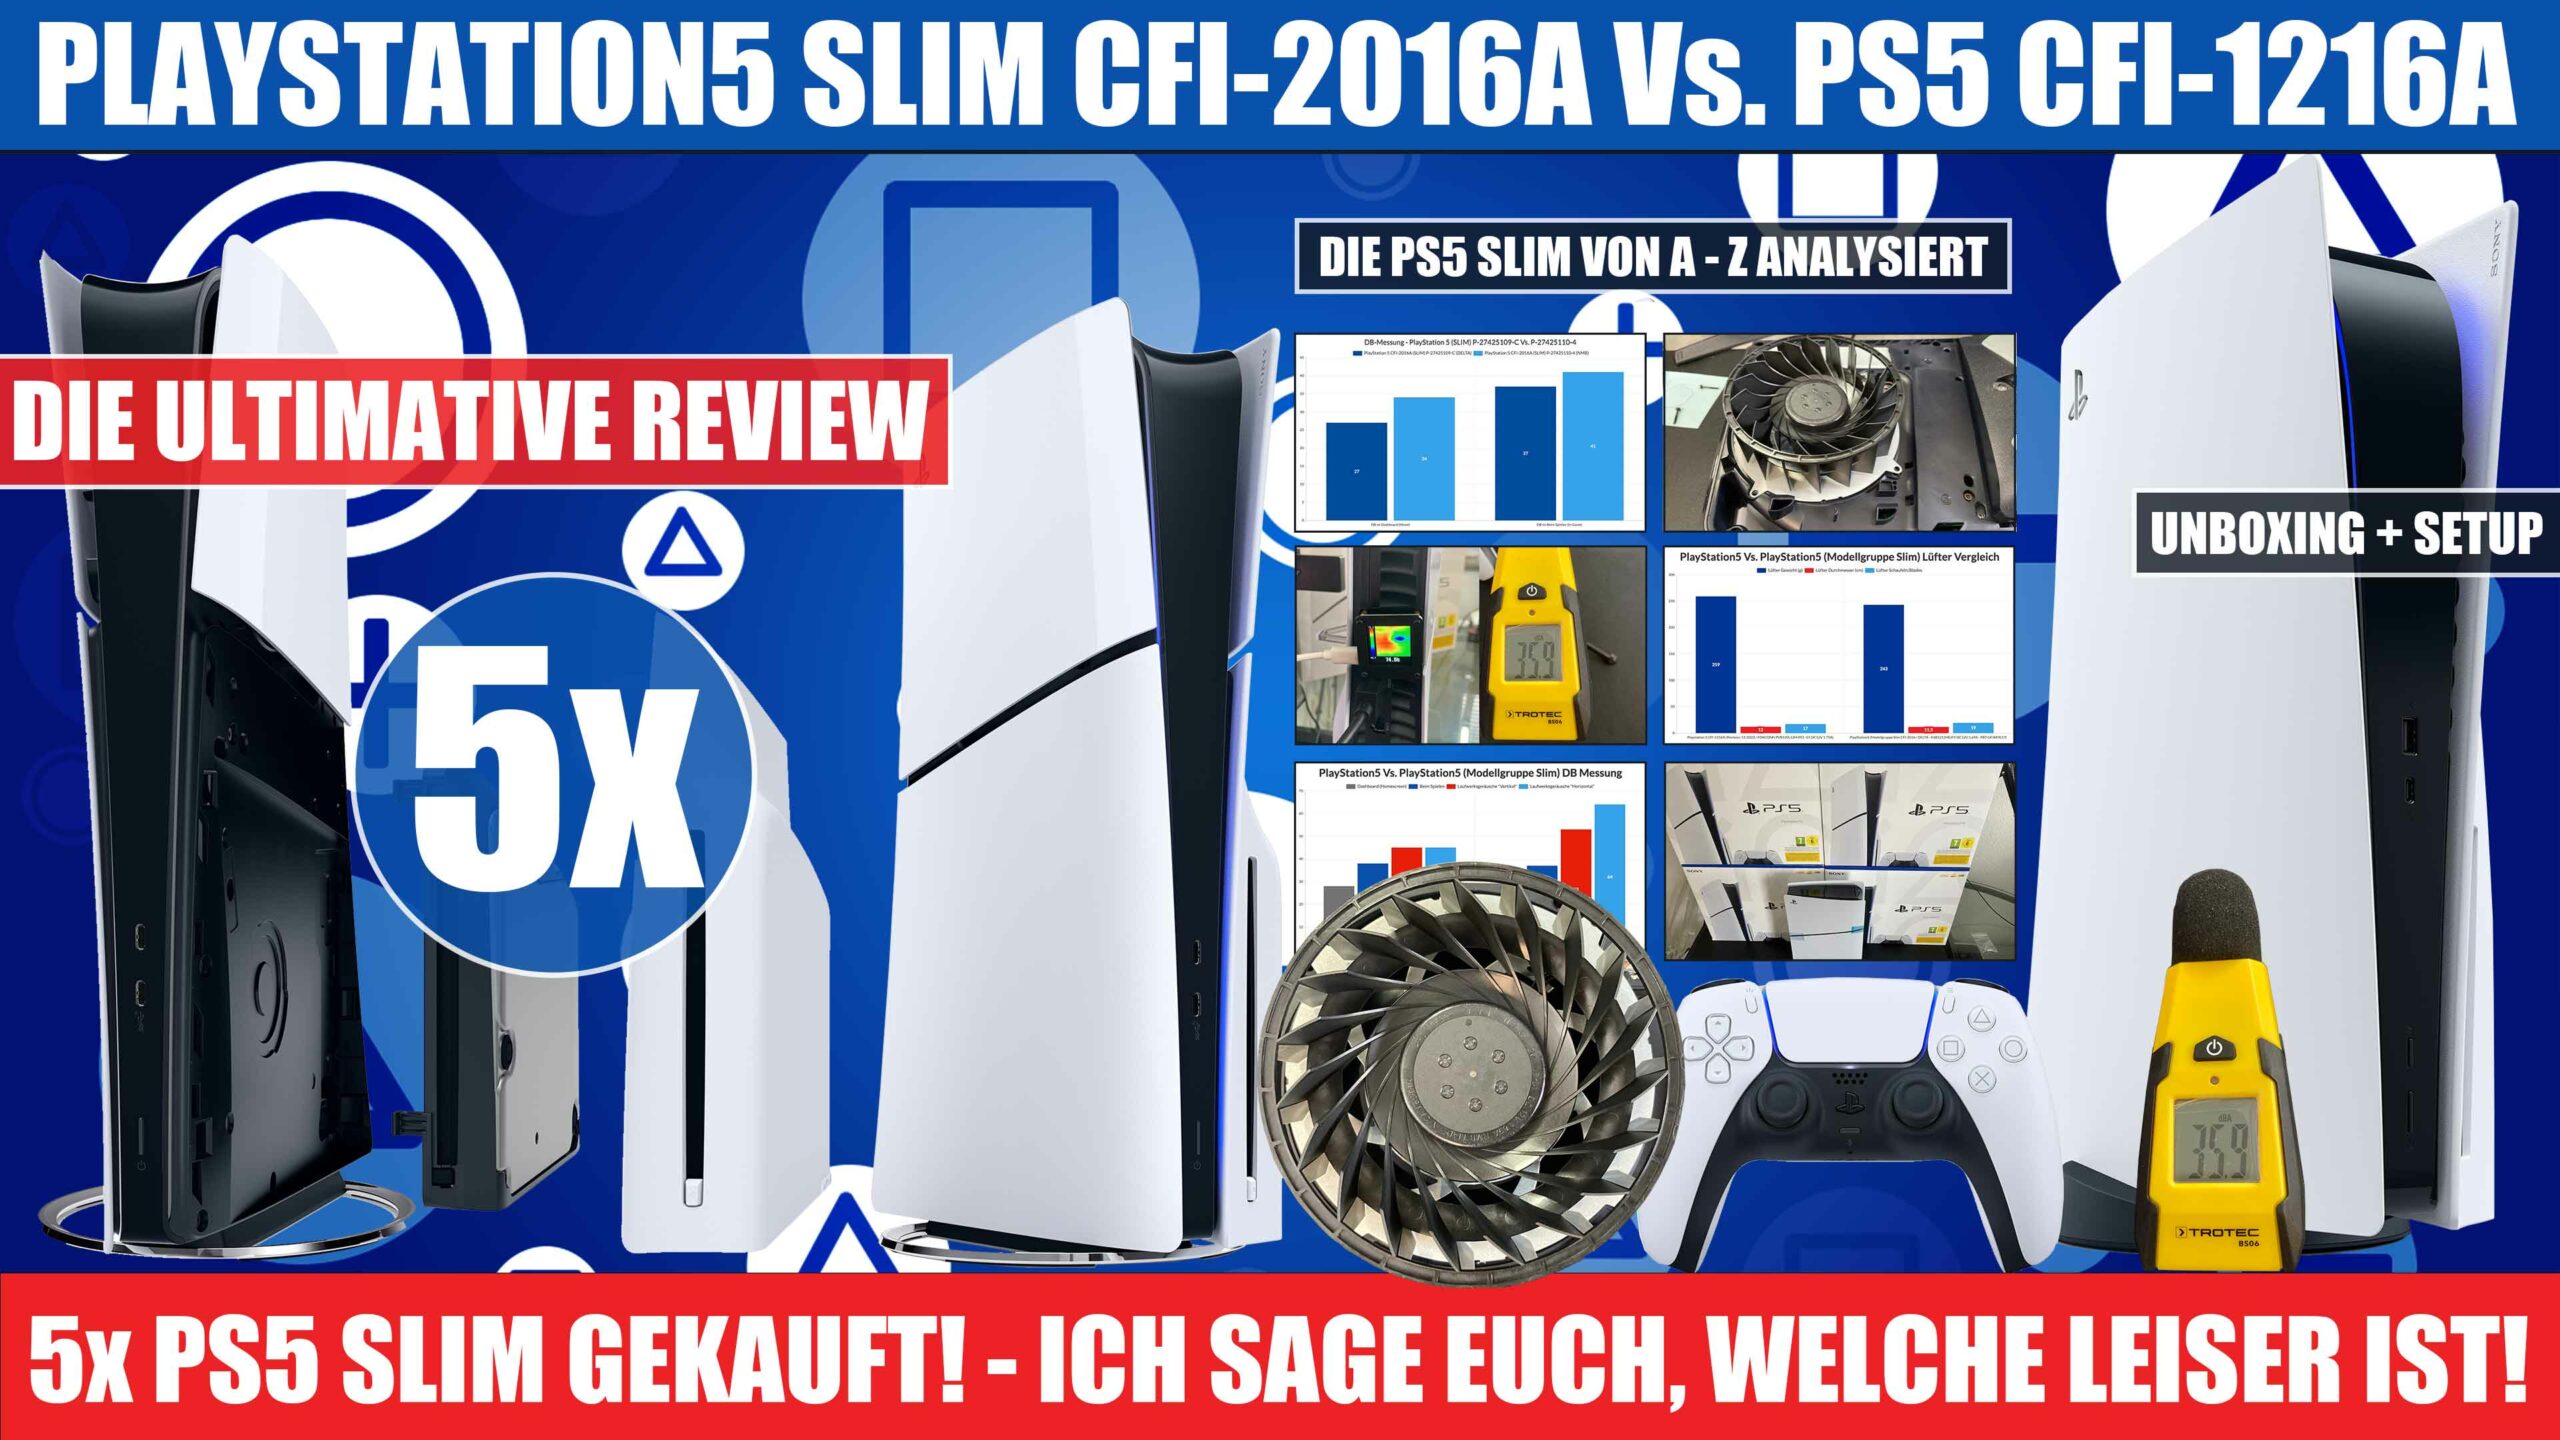 Playstation 5 Slim Unboxing & Setup | Die Ultimative PlayStation5 Review + PS5 Slim Vs PS5 Vergleich